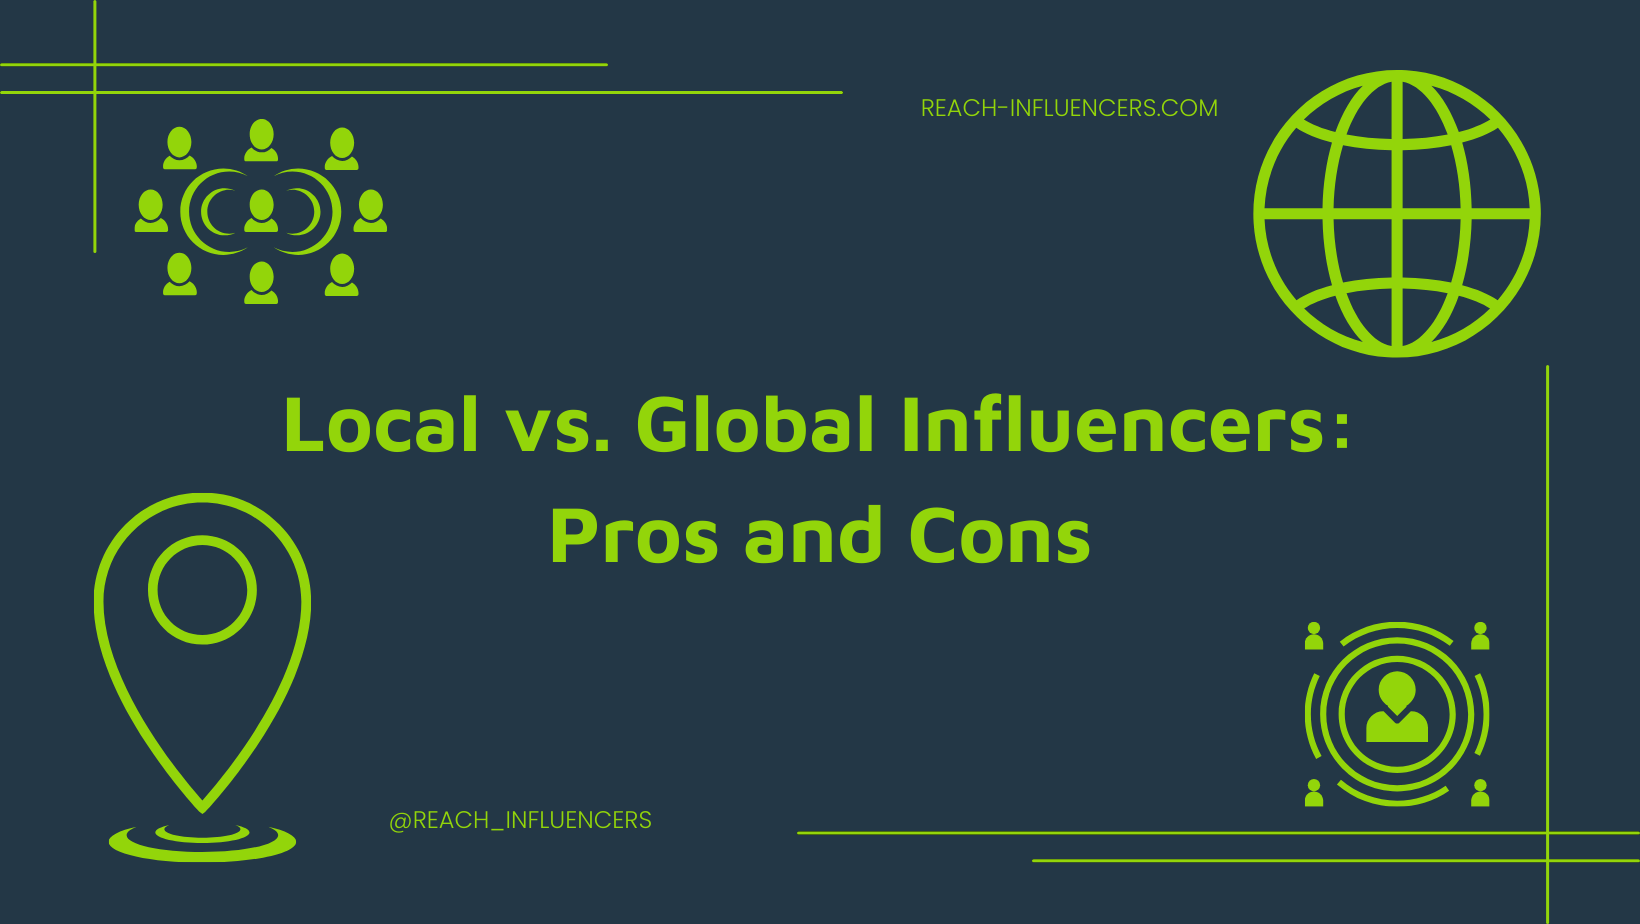 Discover the advantages and disadvantages of local and global influencers in the ever-evolving world of marketing.